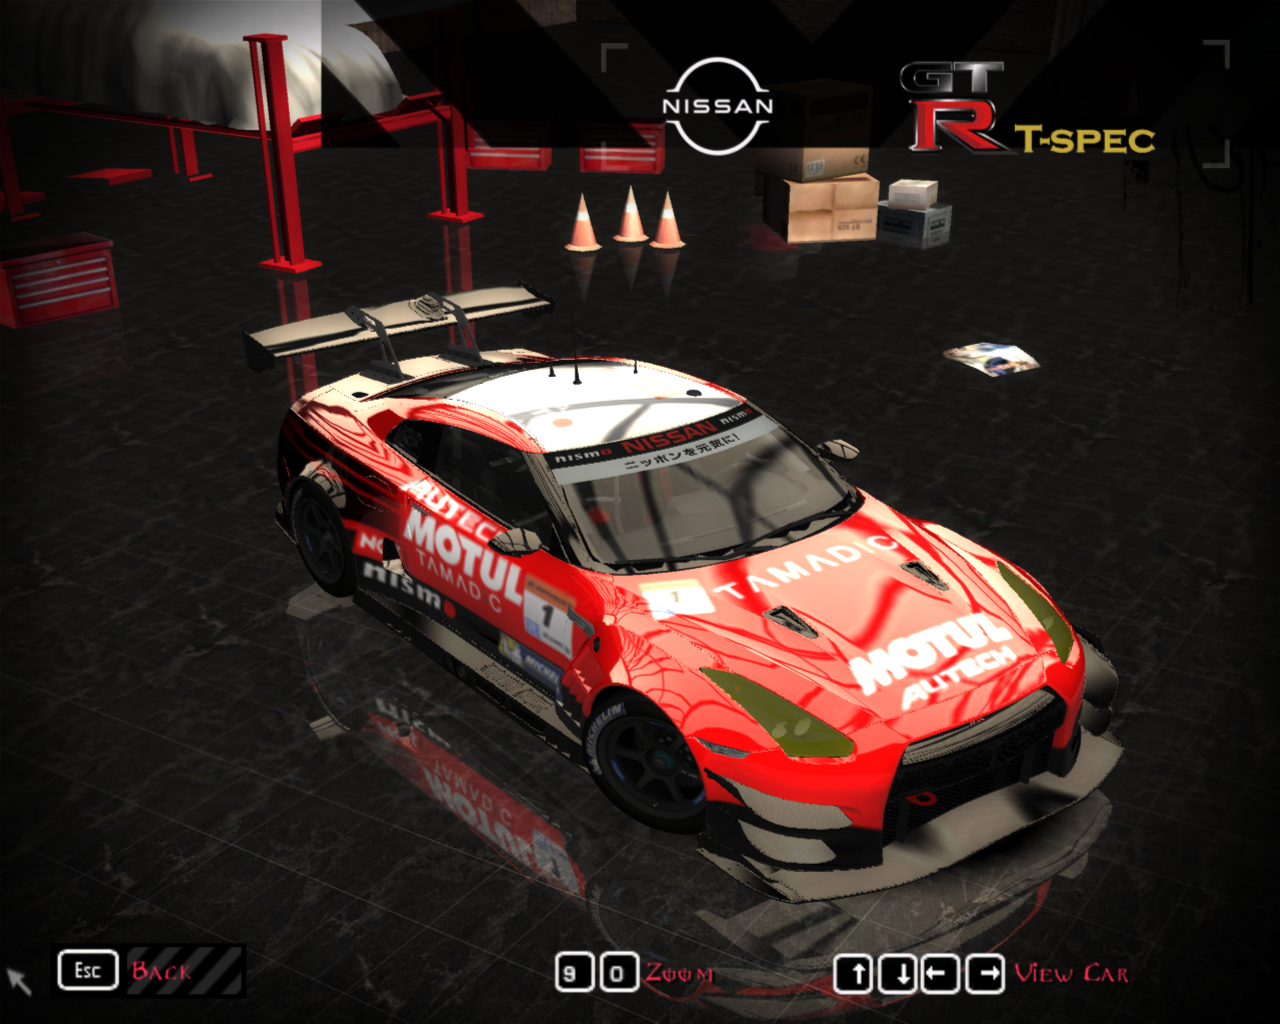 Need For Speed Most Wanted Nissan GT-R T.spec Autech Motul Livery